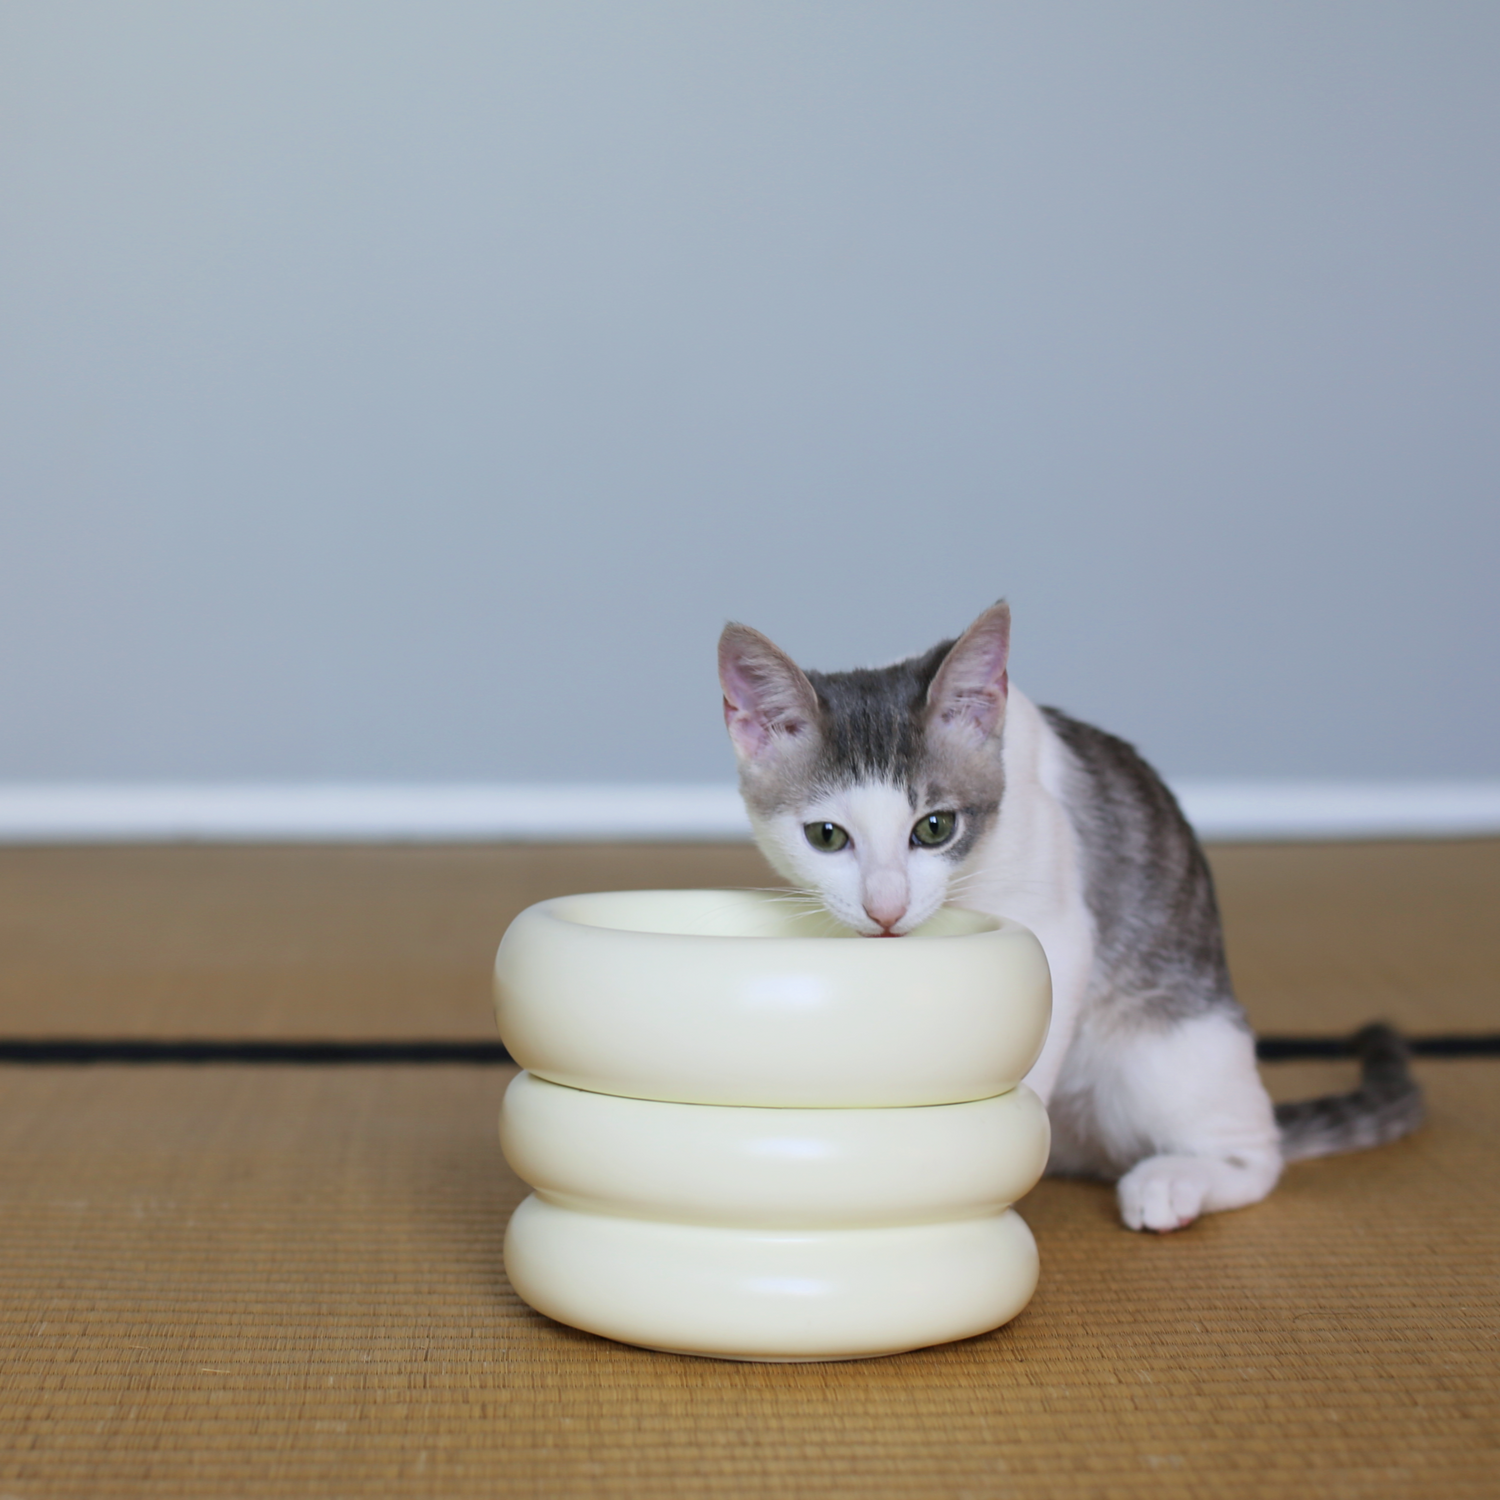 best elevated cat bowl because of stacking modern cat bowl feature in white ceramic with grey and white cat eating from tatami mat